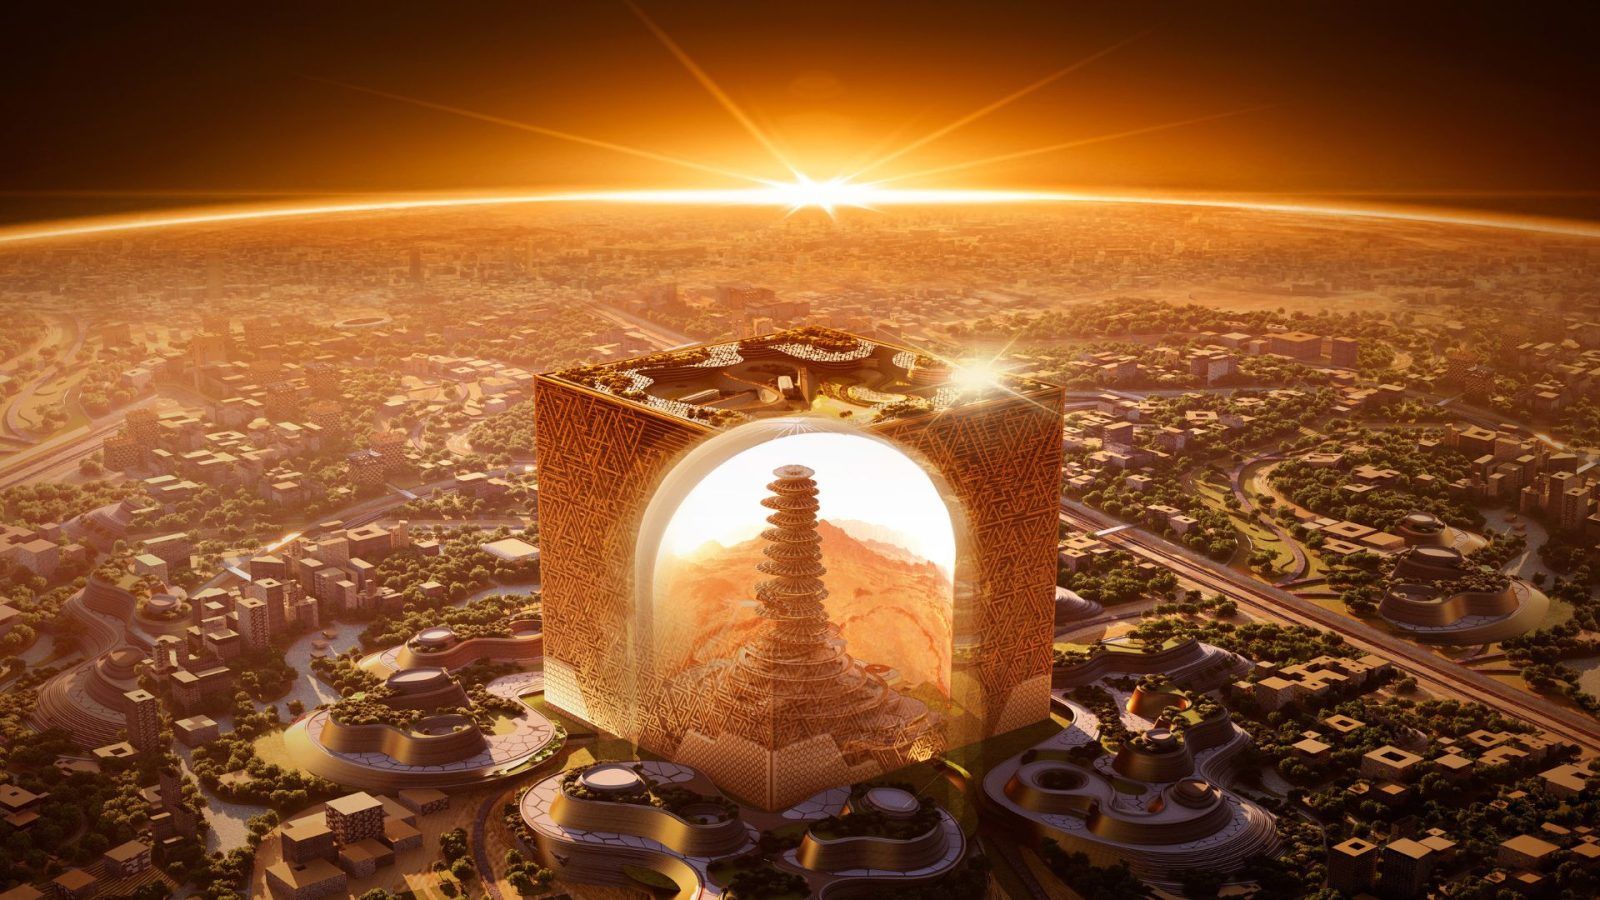 The Mukaab: Saudi Arabia's New Project Is A Huge Cube-shaped Structure